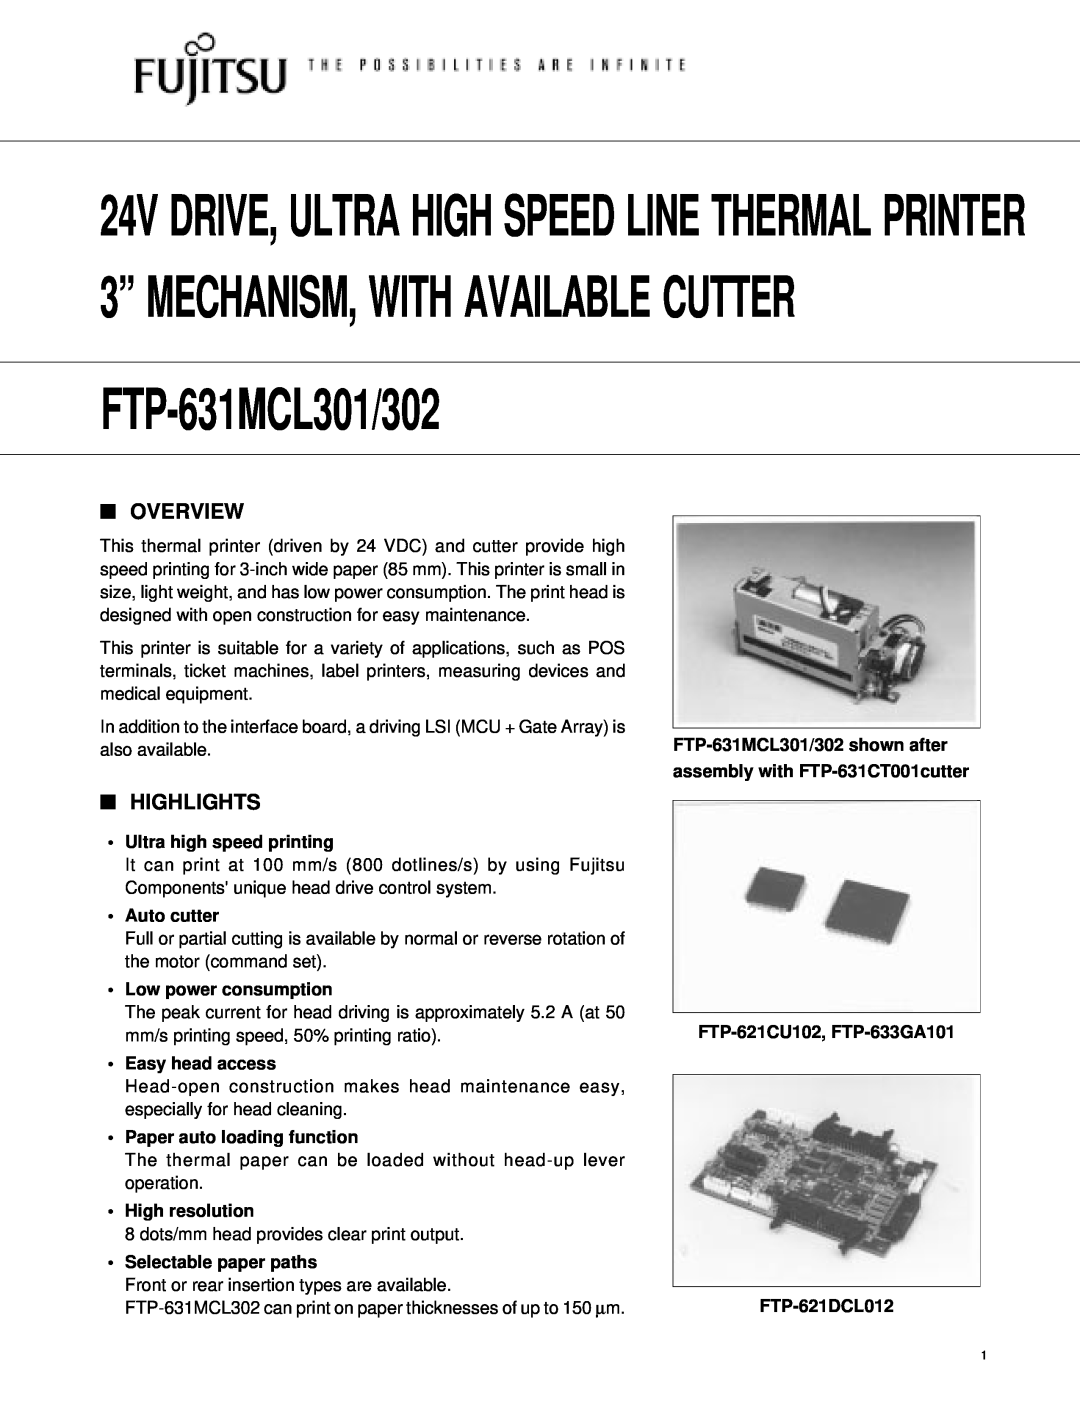 Fujitsu FTP-631MCL302 manual Overview, Highlights, FTP-631MCL301/302 shown after assembly with FTP-631CT001cutter 